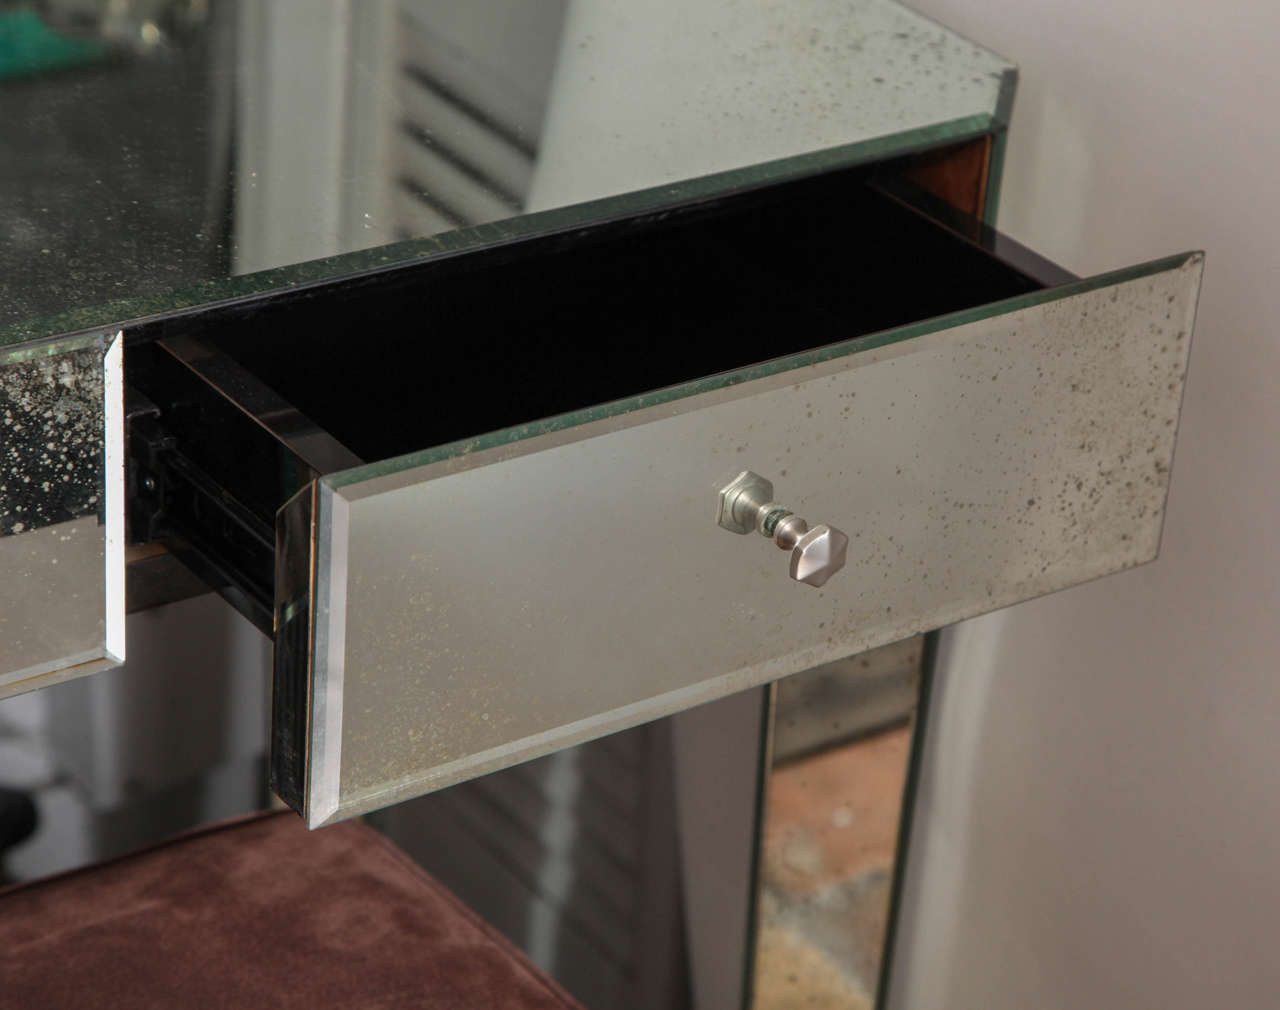 A sleek and stylish modern vanity or desk in distressed mirror.